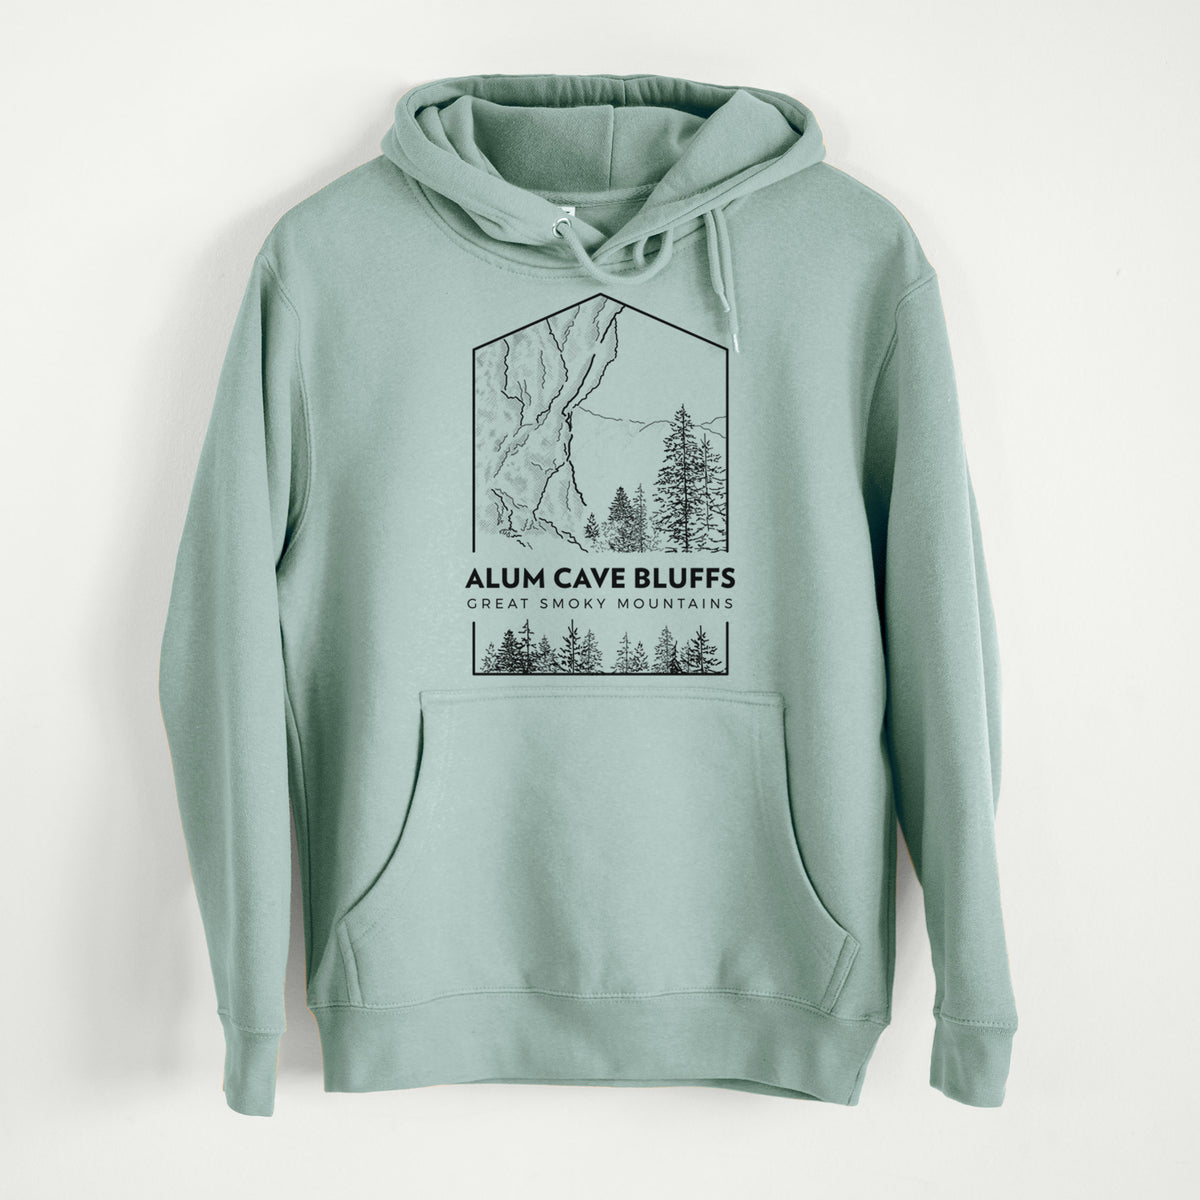 Alum Cave Bluffs - Great Smoky Mountains National Park  - Mid-Weight Unisex Premium Blend Hoodie